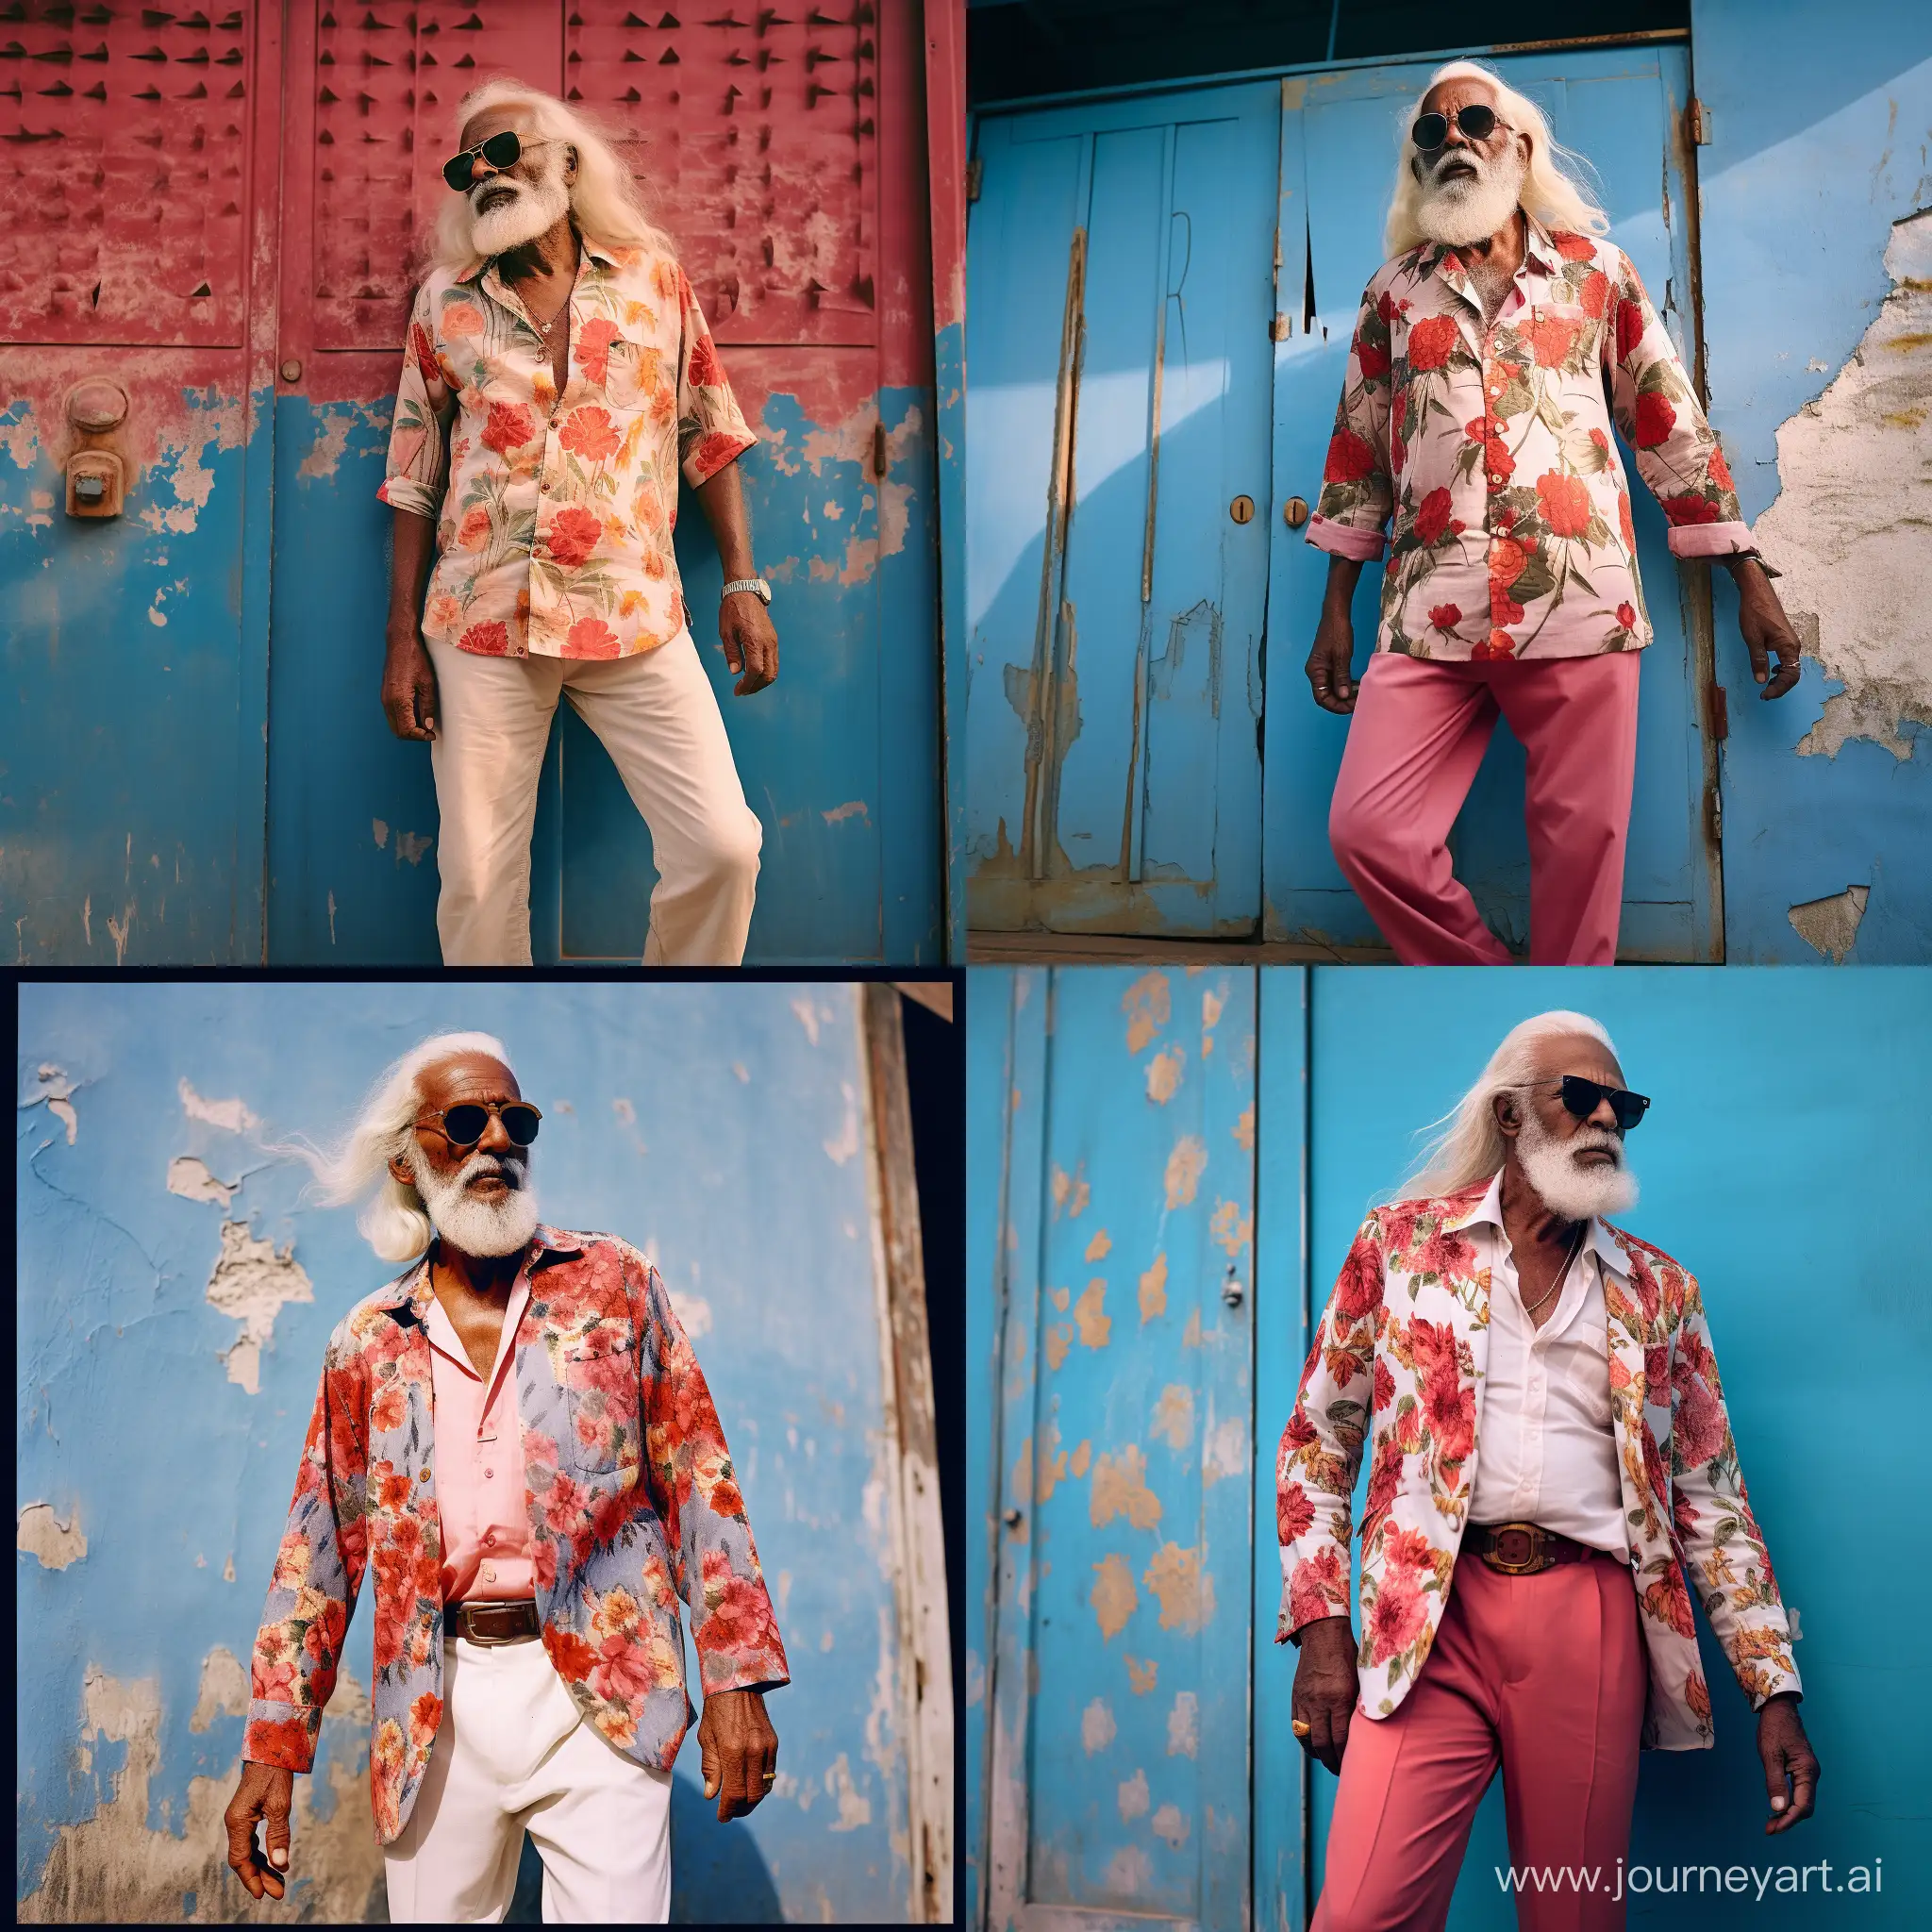     80 years old hippie dark skin long whit hair and beard red sunglasses a bleu jacket and pink shirt with flowers print and yellow wide trouser and silver sandels is standing before old light bleu wall 
    india  soft contrast  total body  low angle 35mm fuji xt4 fotorealistisch